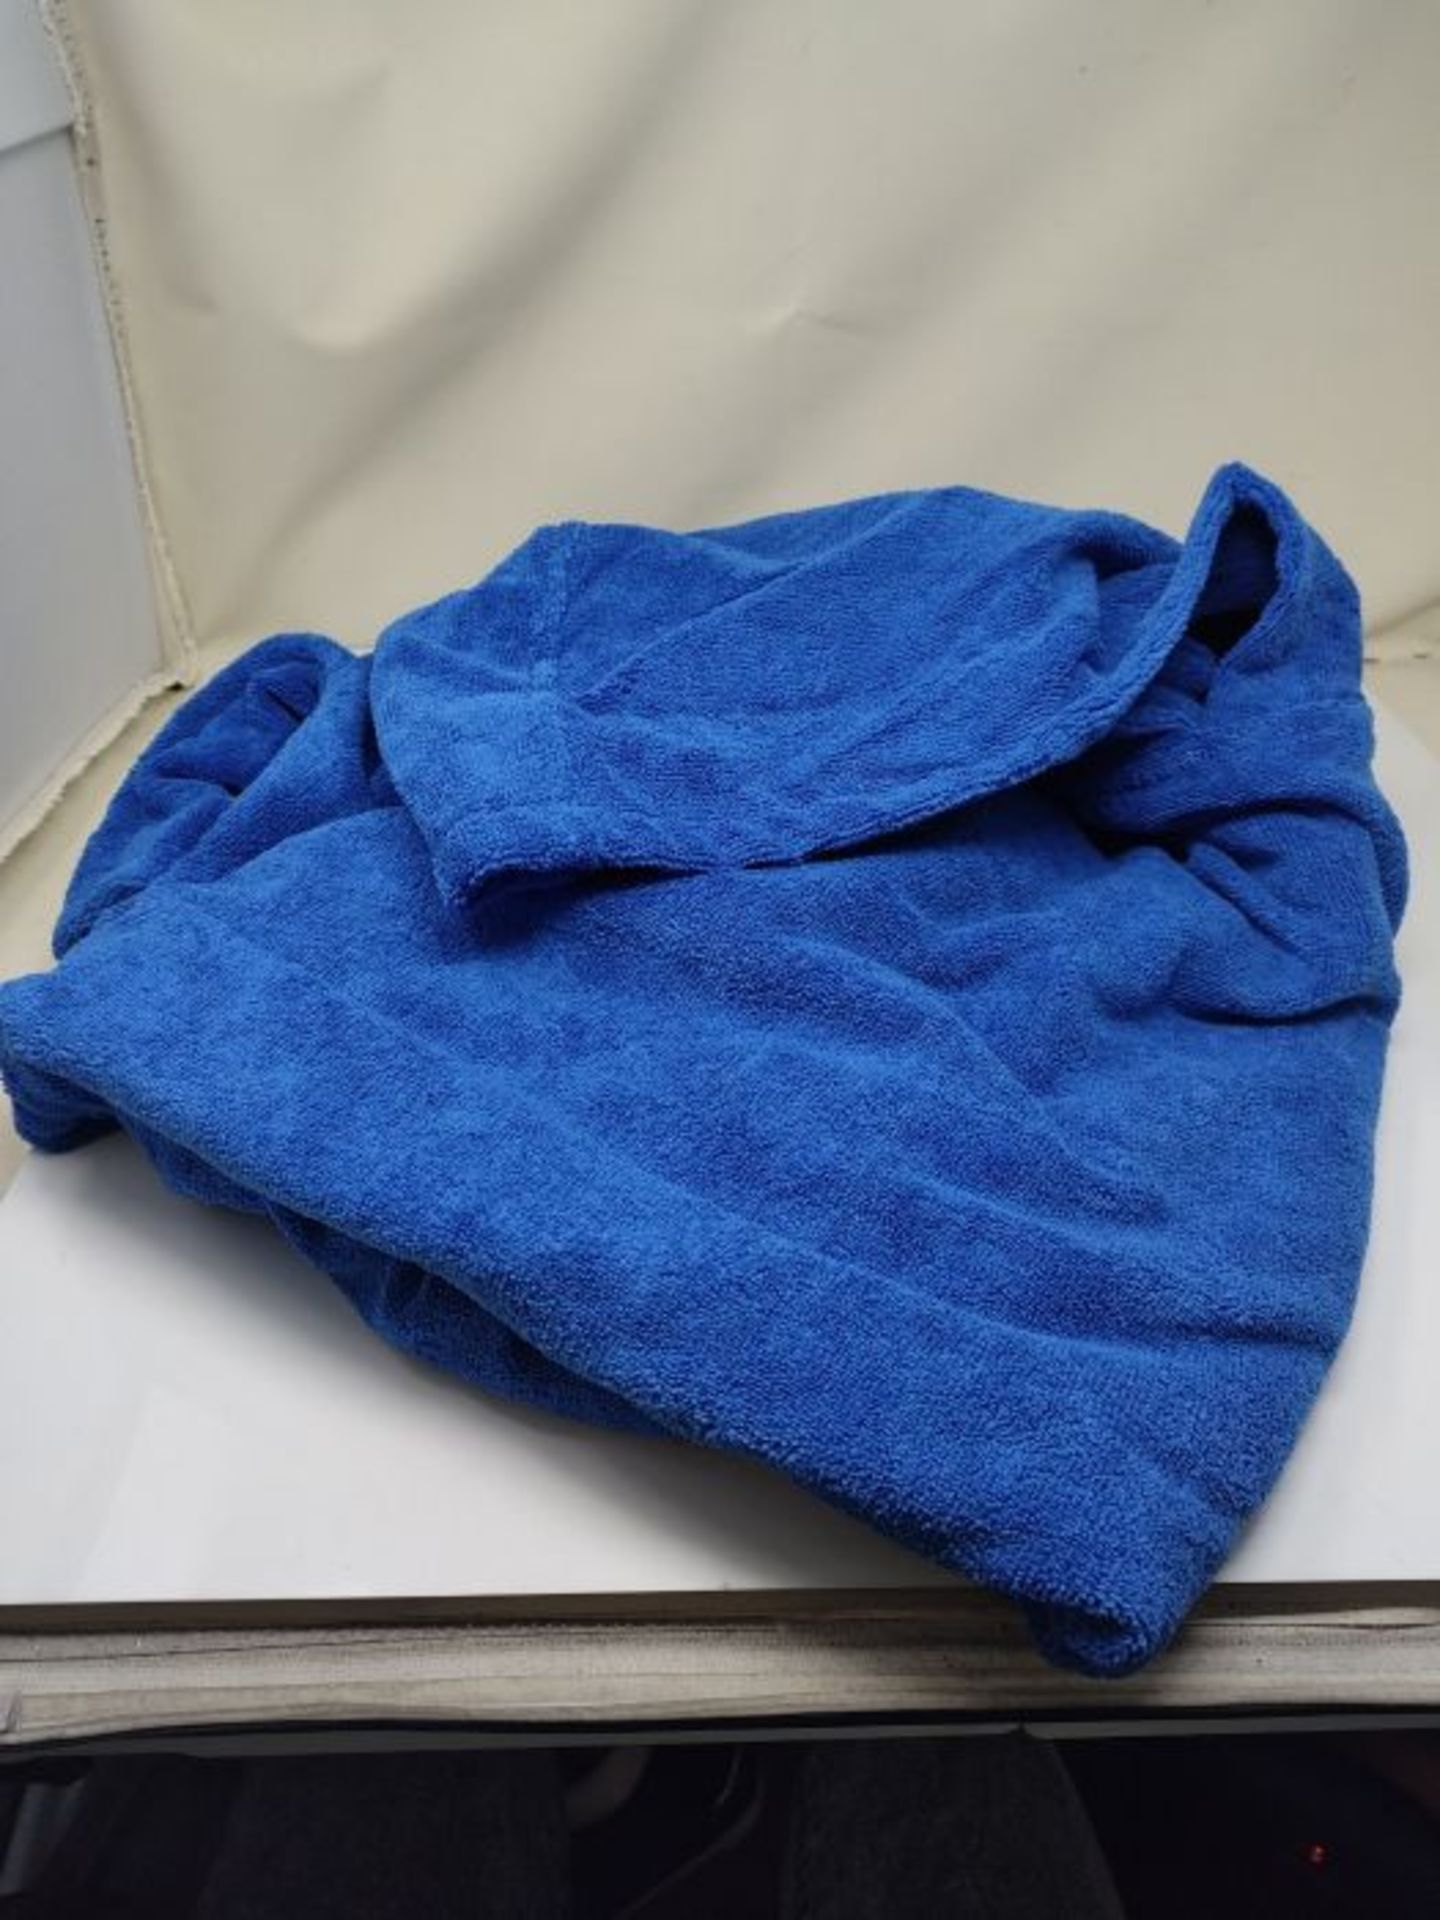 Winthome Sleeveless Changing Bath Robe with Pocket, Surf Poncho Towel (Blue) - Image 2 of 2